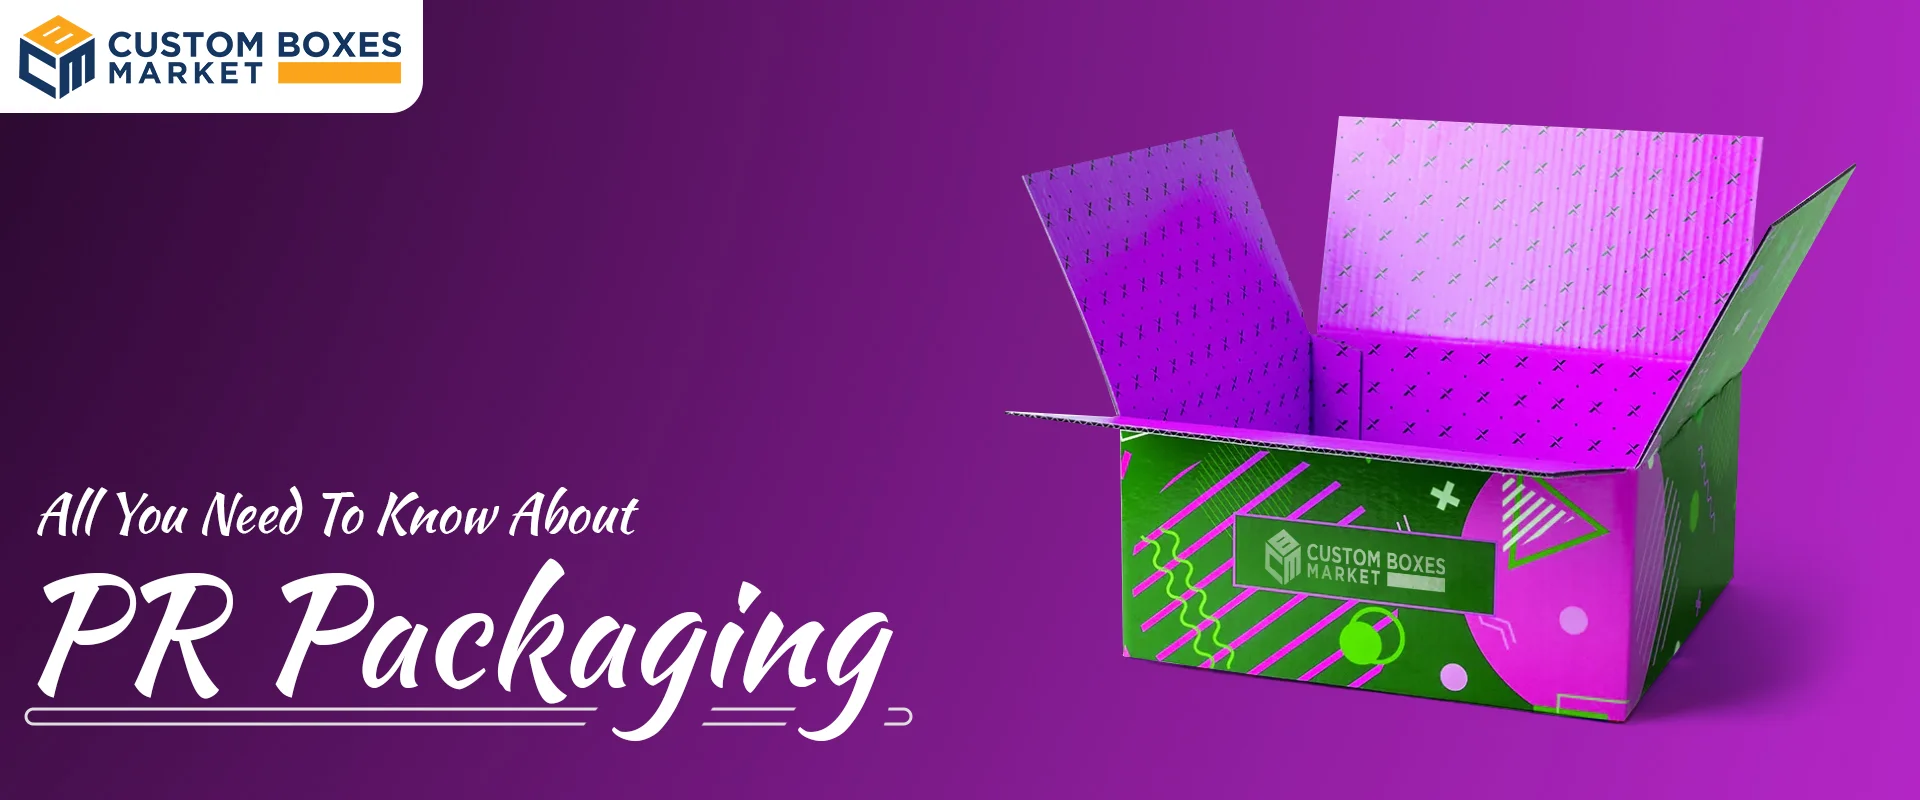 PR Packaging All You Need To Know – CBM